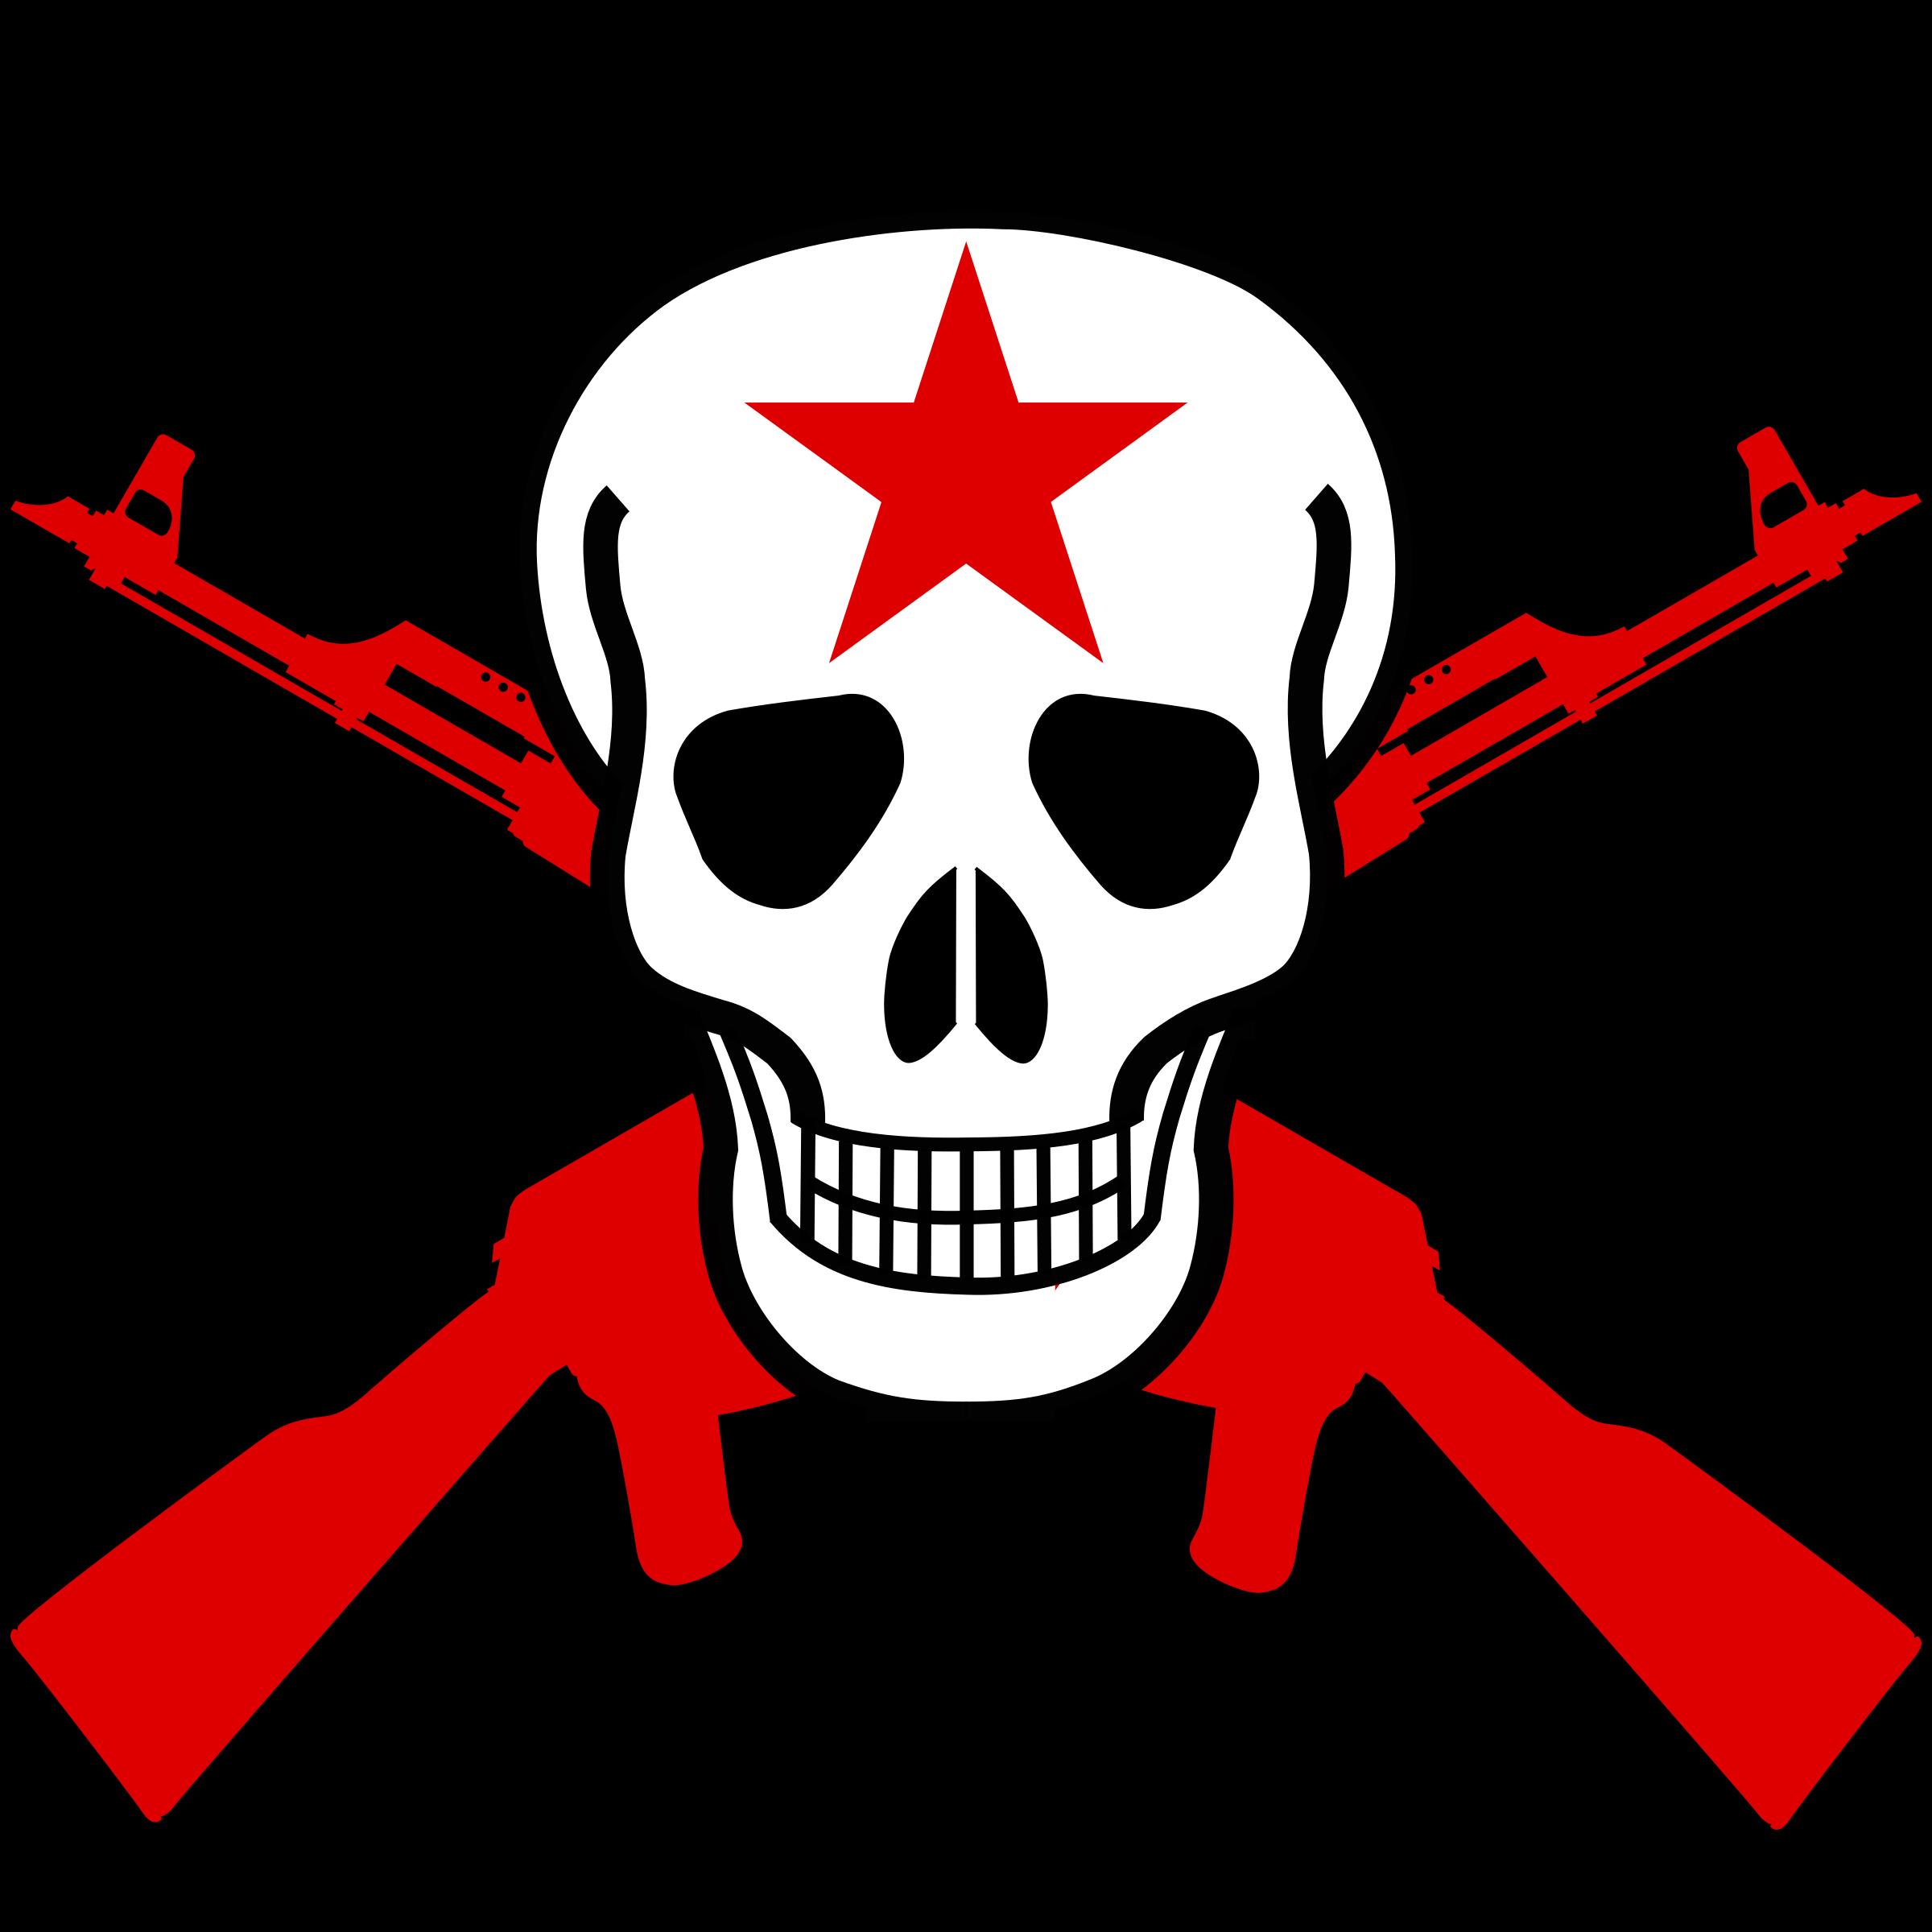 Skull and crossed guns PNG icons